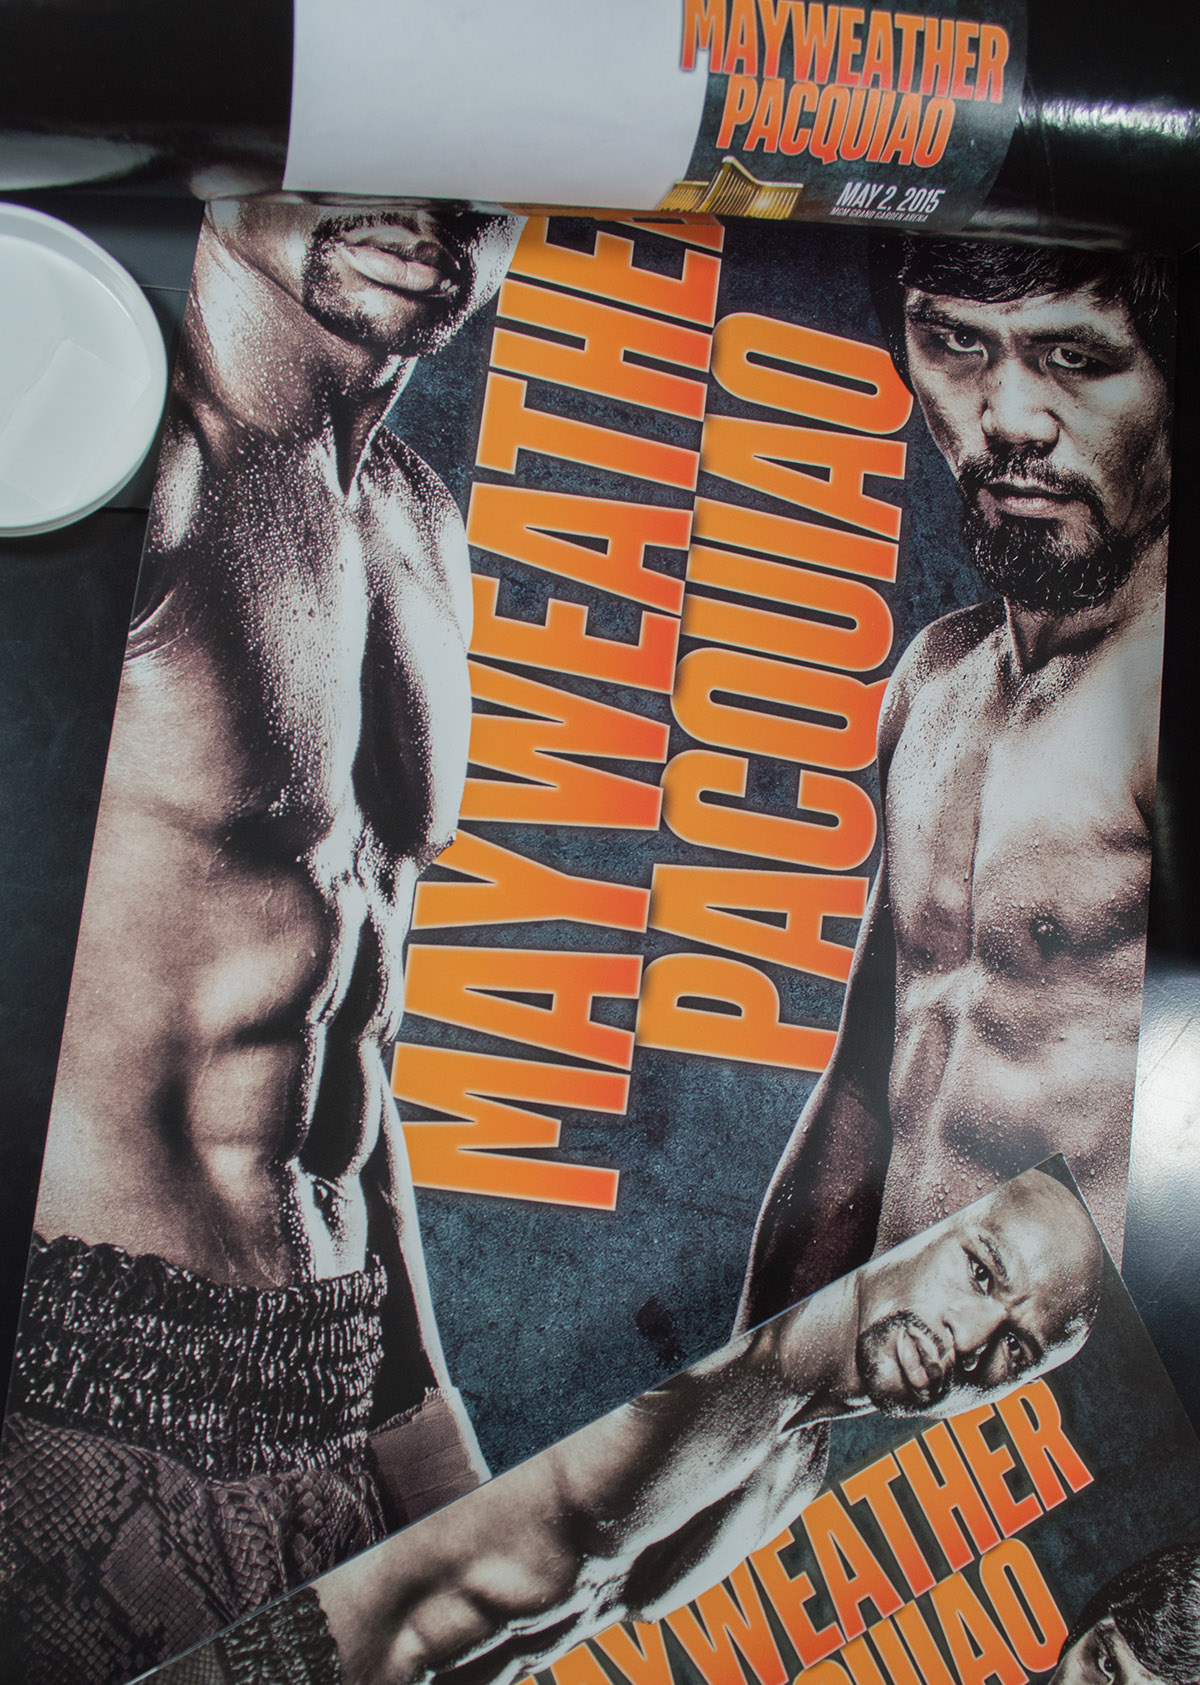 Mayweather pacquiao Las Vegas MGM Grand Boxing mailing tube Direct mail